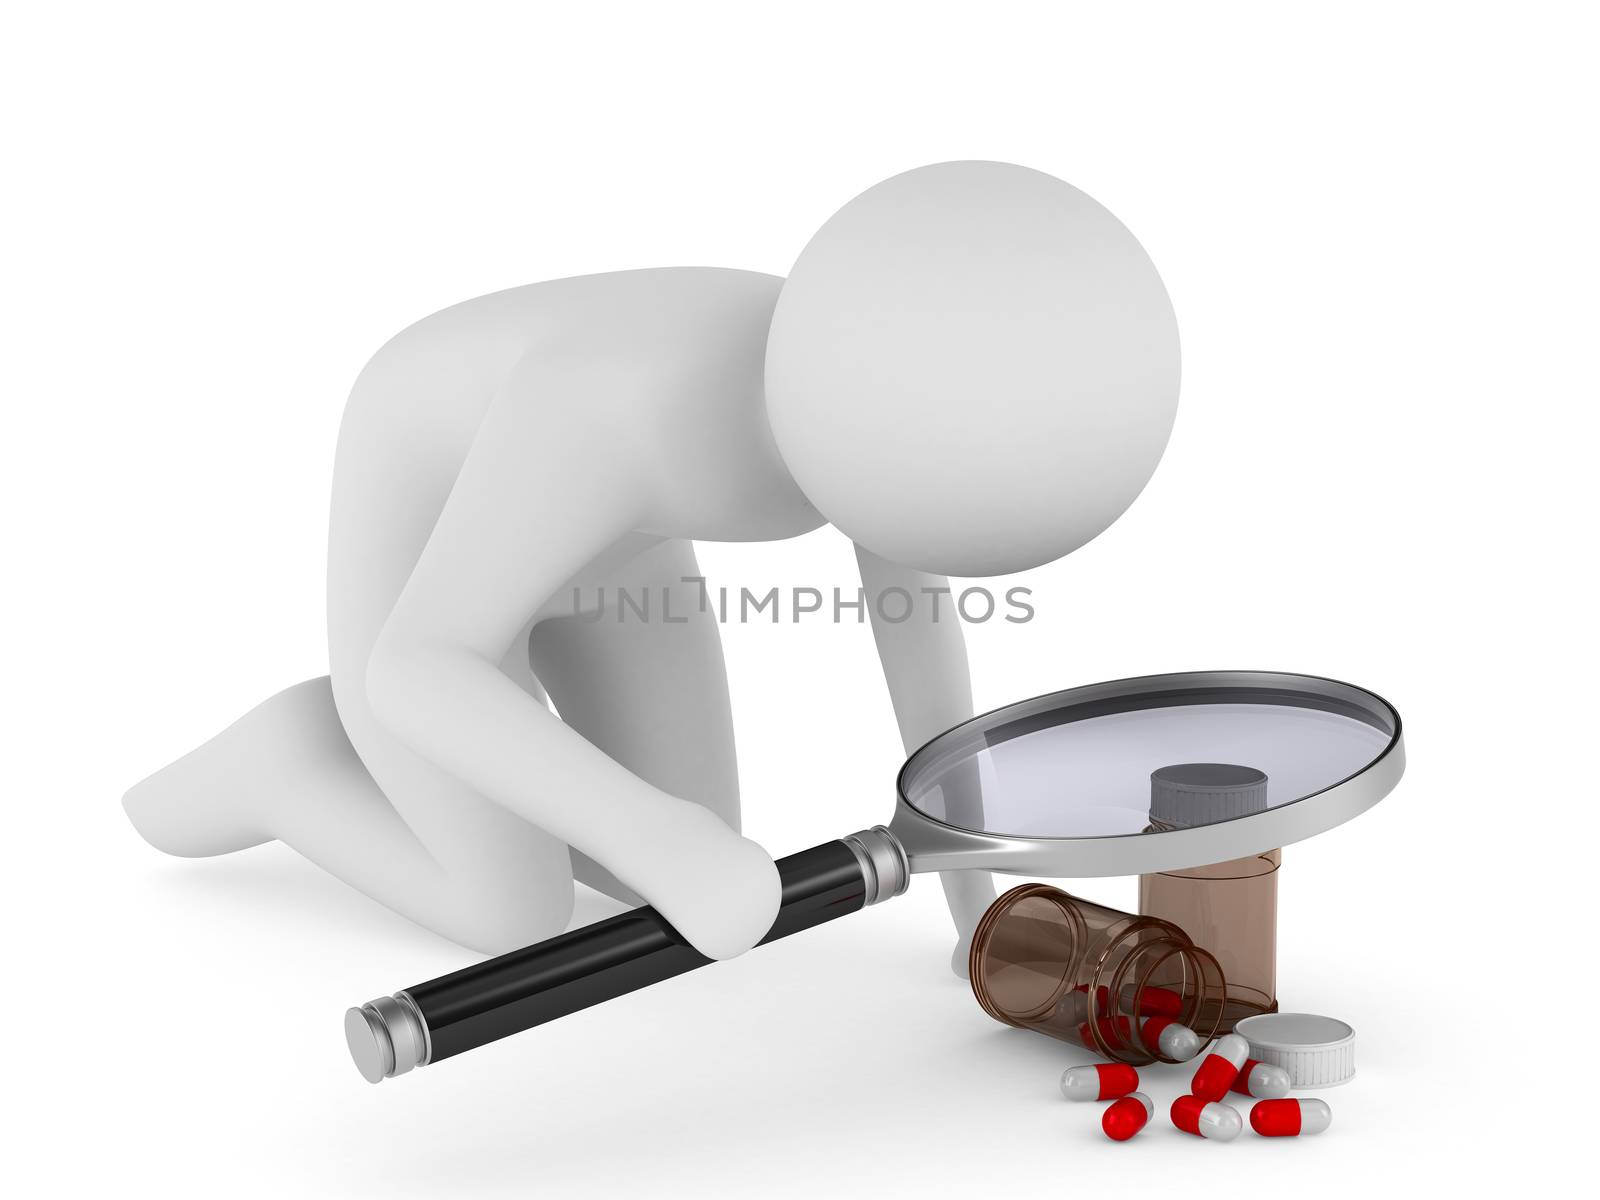 Man with magnifier on white background. Isolated 3D image